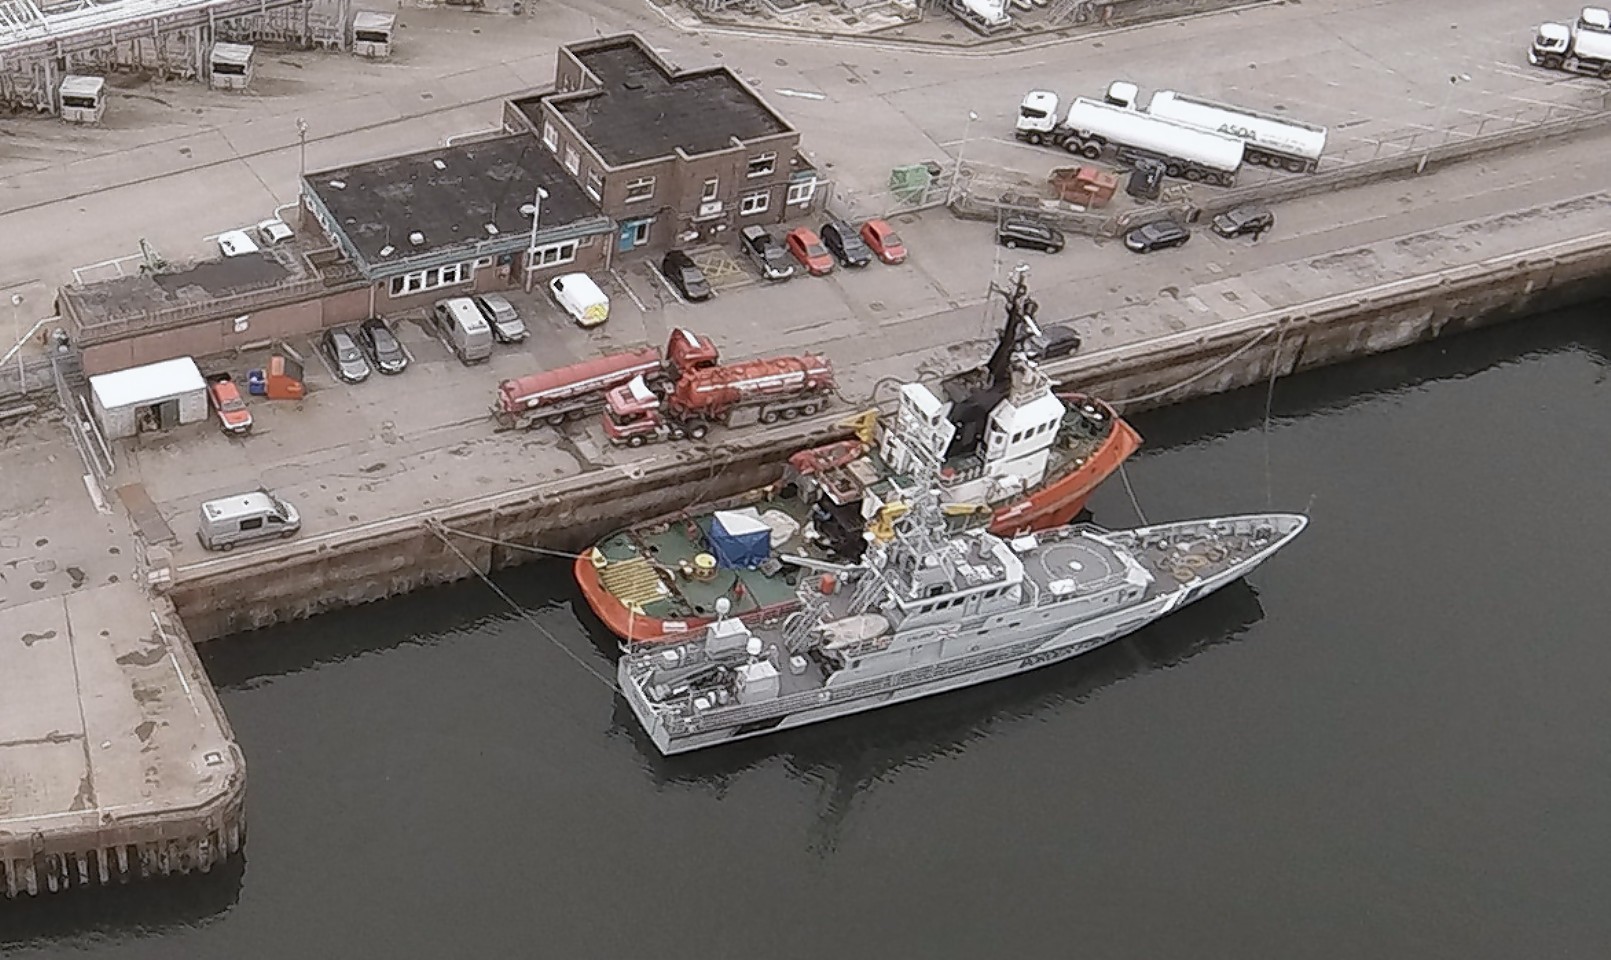 Borders Force HMS Valiant with Tanzanian-registered Hamal berthed at Aberdeen Harbour.